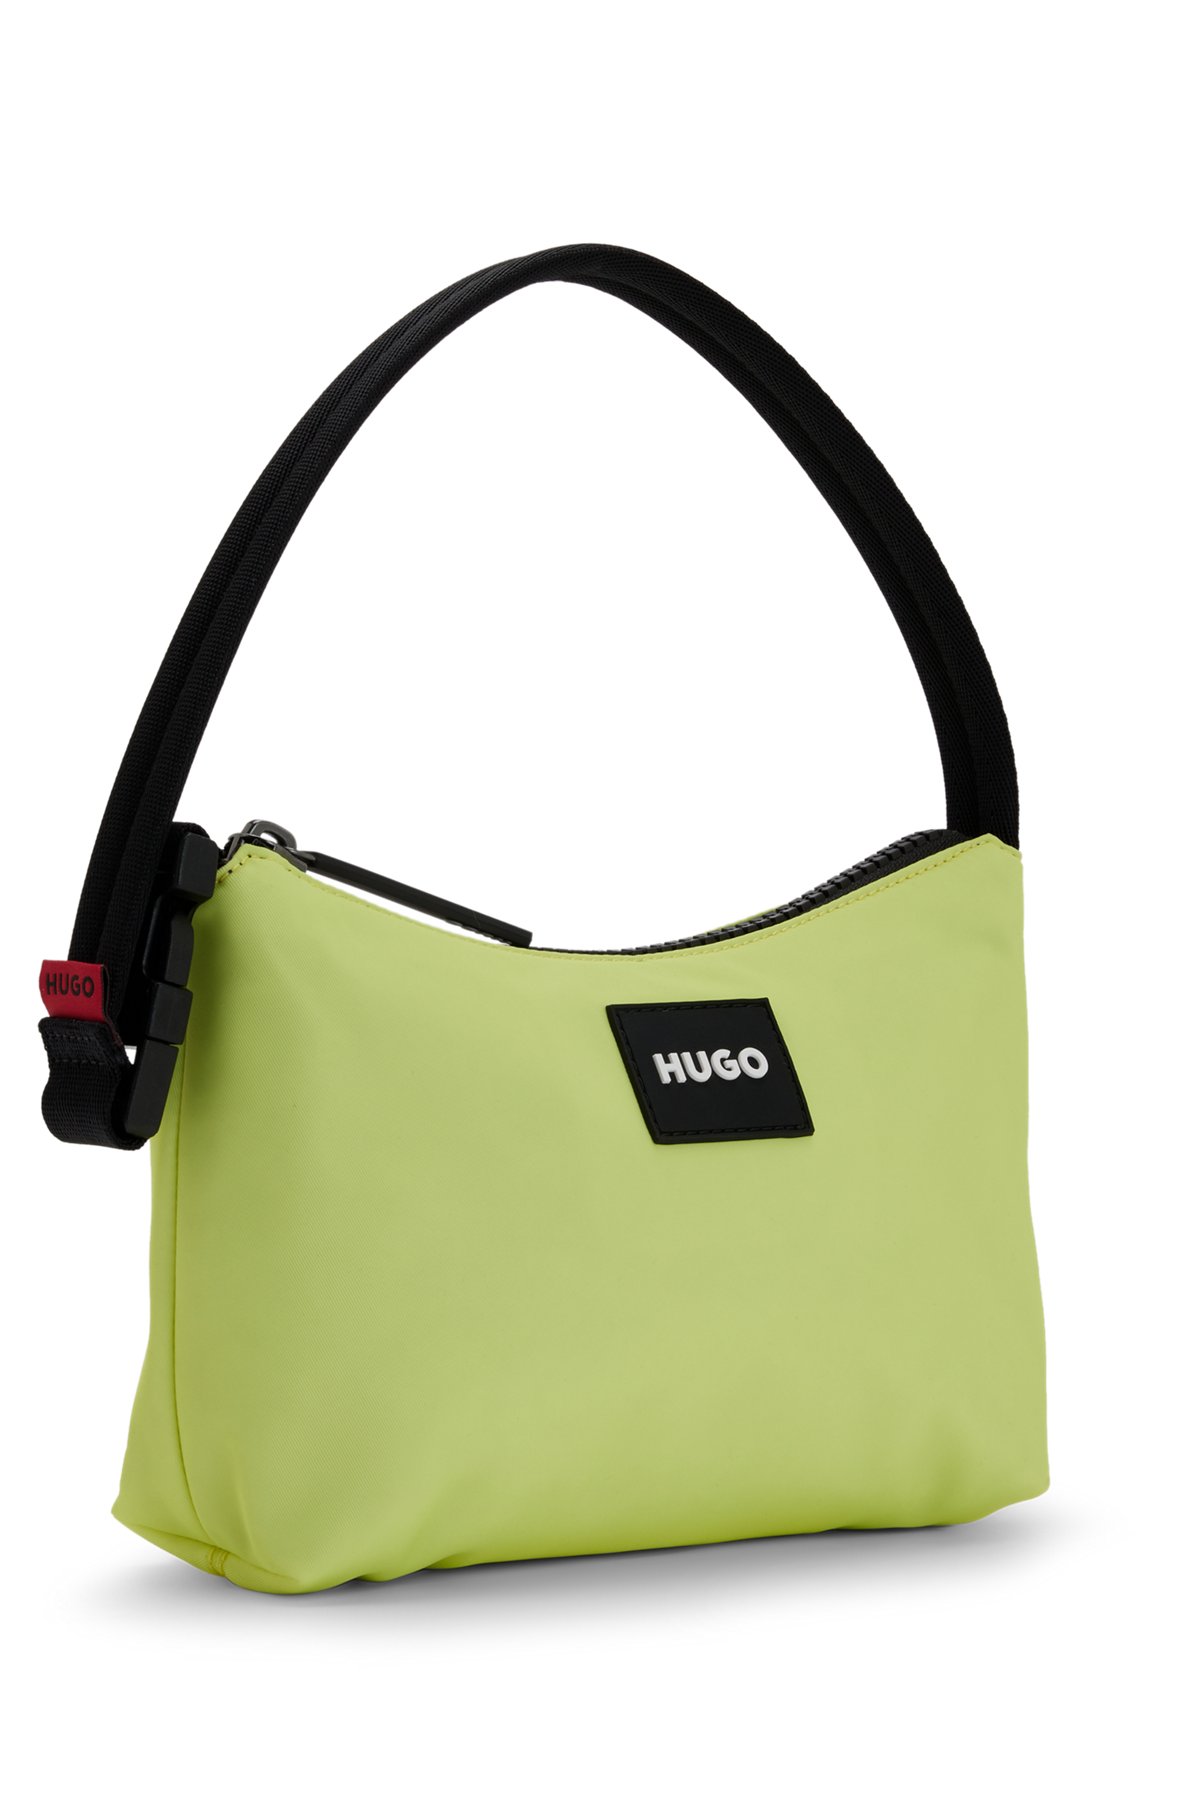 patch - Hobo HUGO bag rubberised with logo